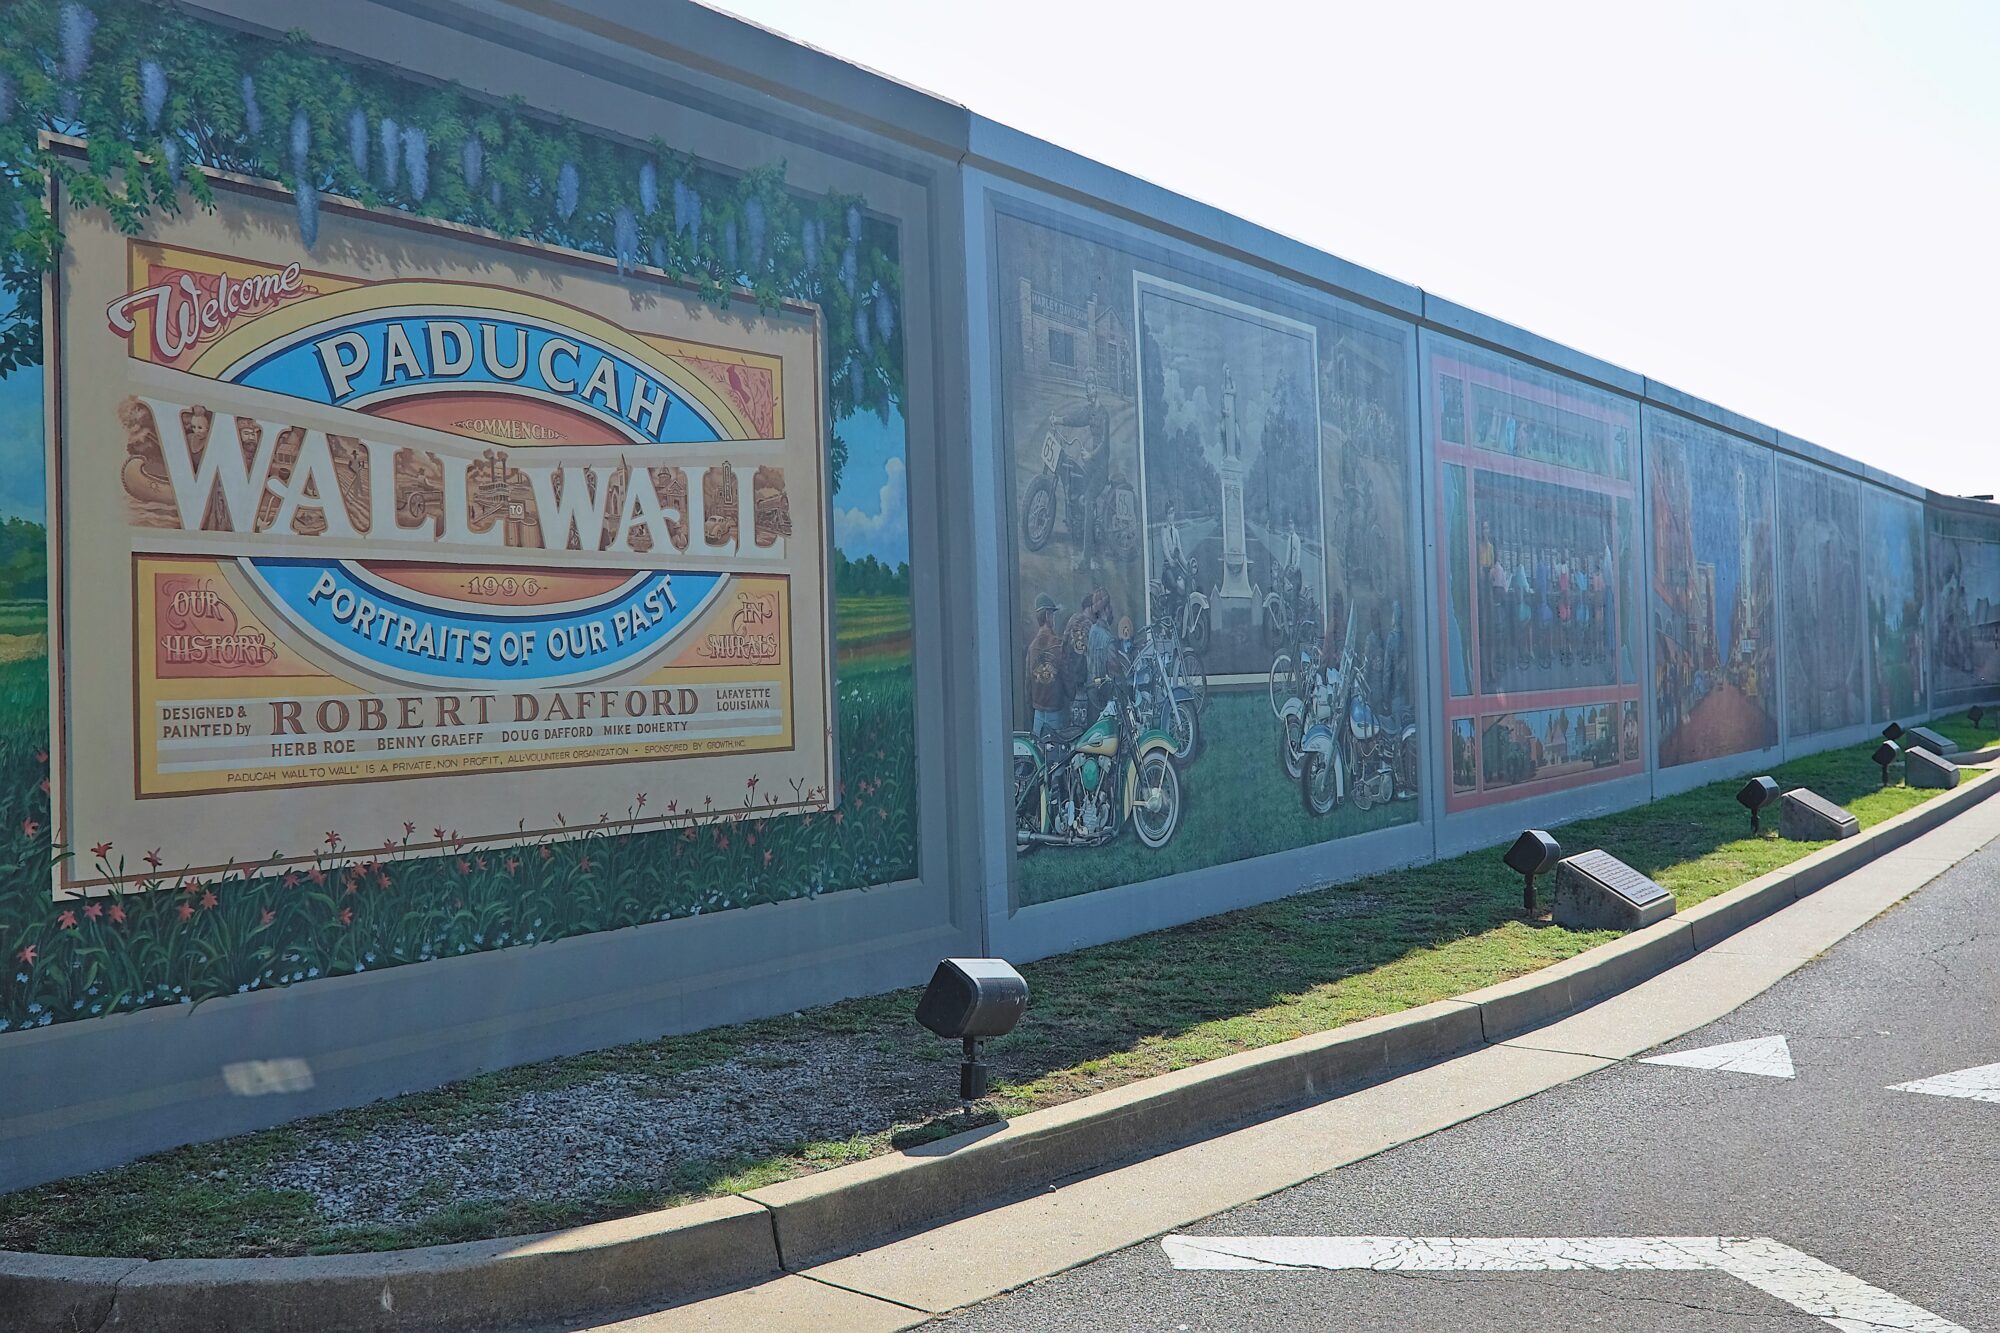 A string of murals in Paducah Wall to Wall